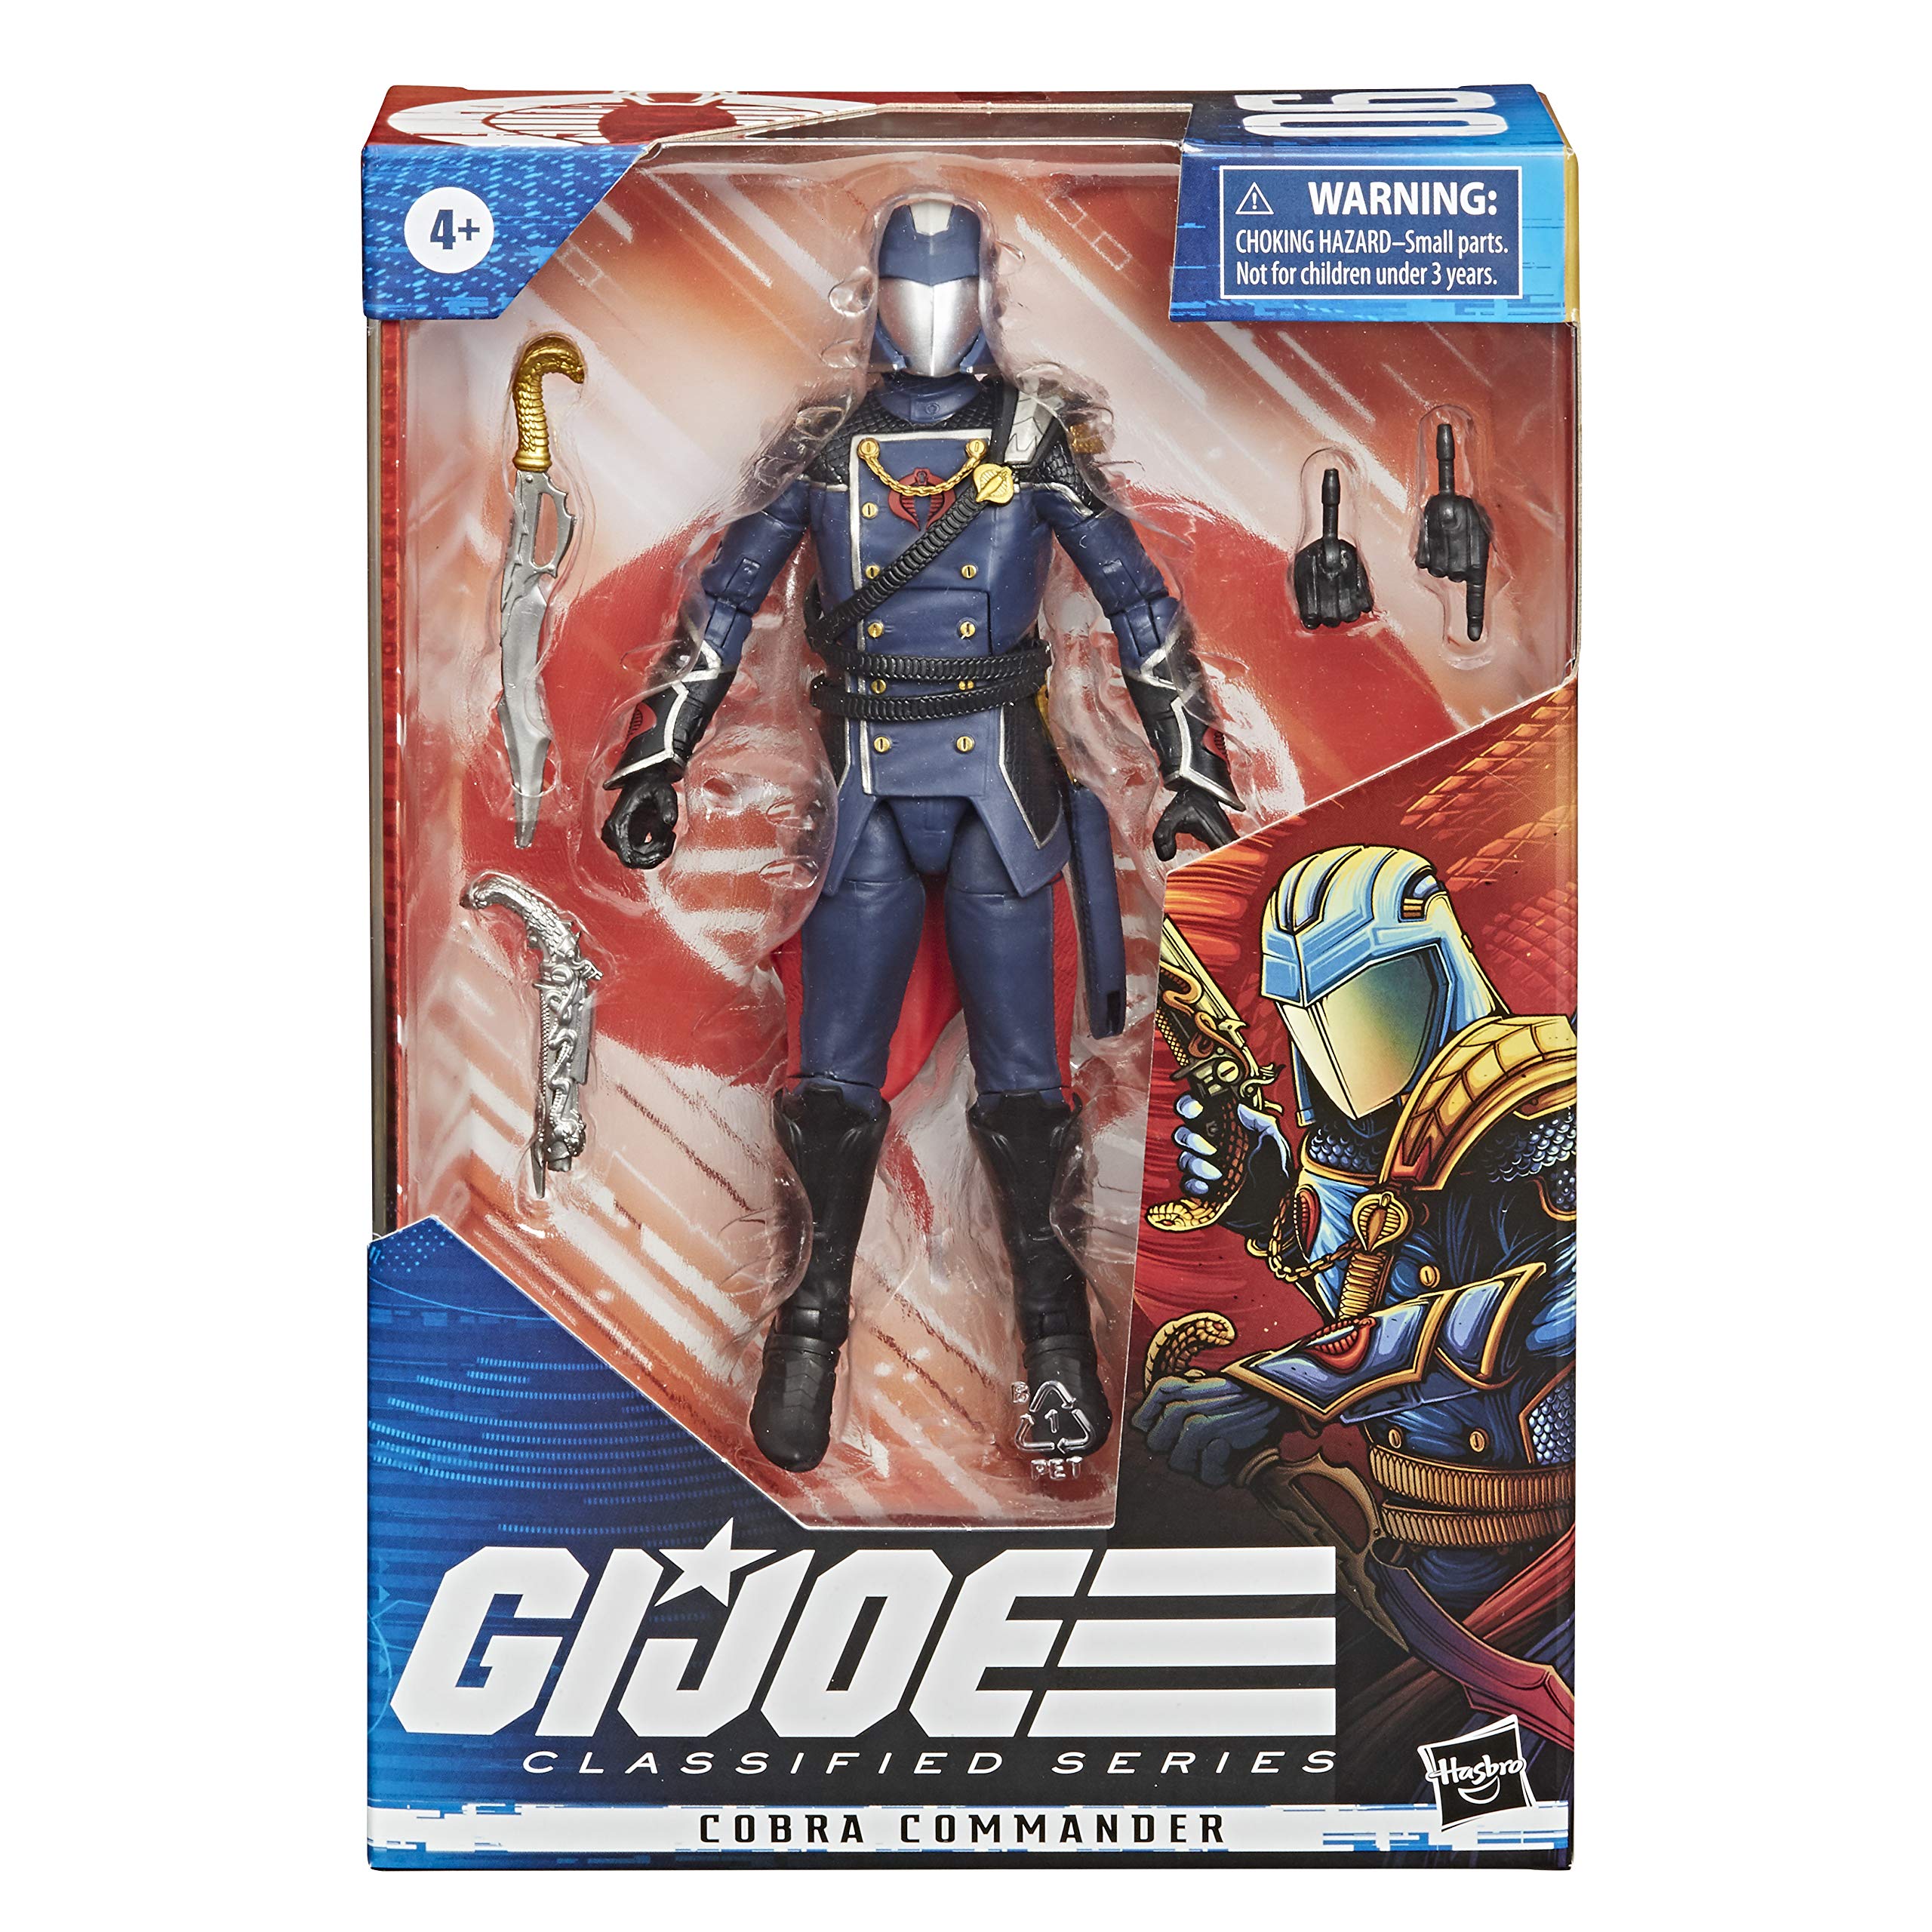 G. I. Joe Classified Series Cobra Commander Action Figure 06 Collectible Premium Toy, Multiple Accessories, 6-Inch Scale, Custom Package Art